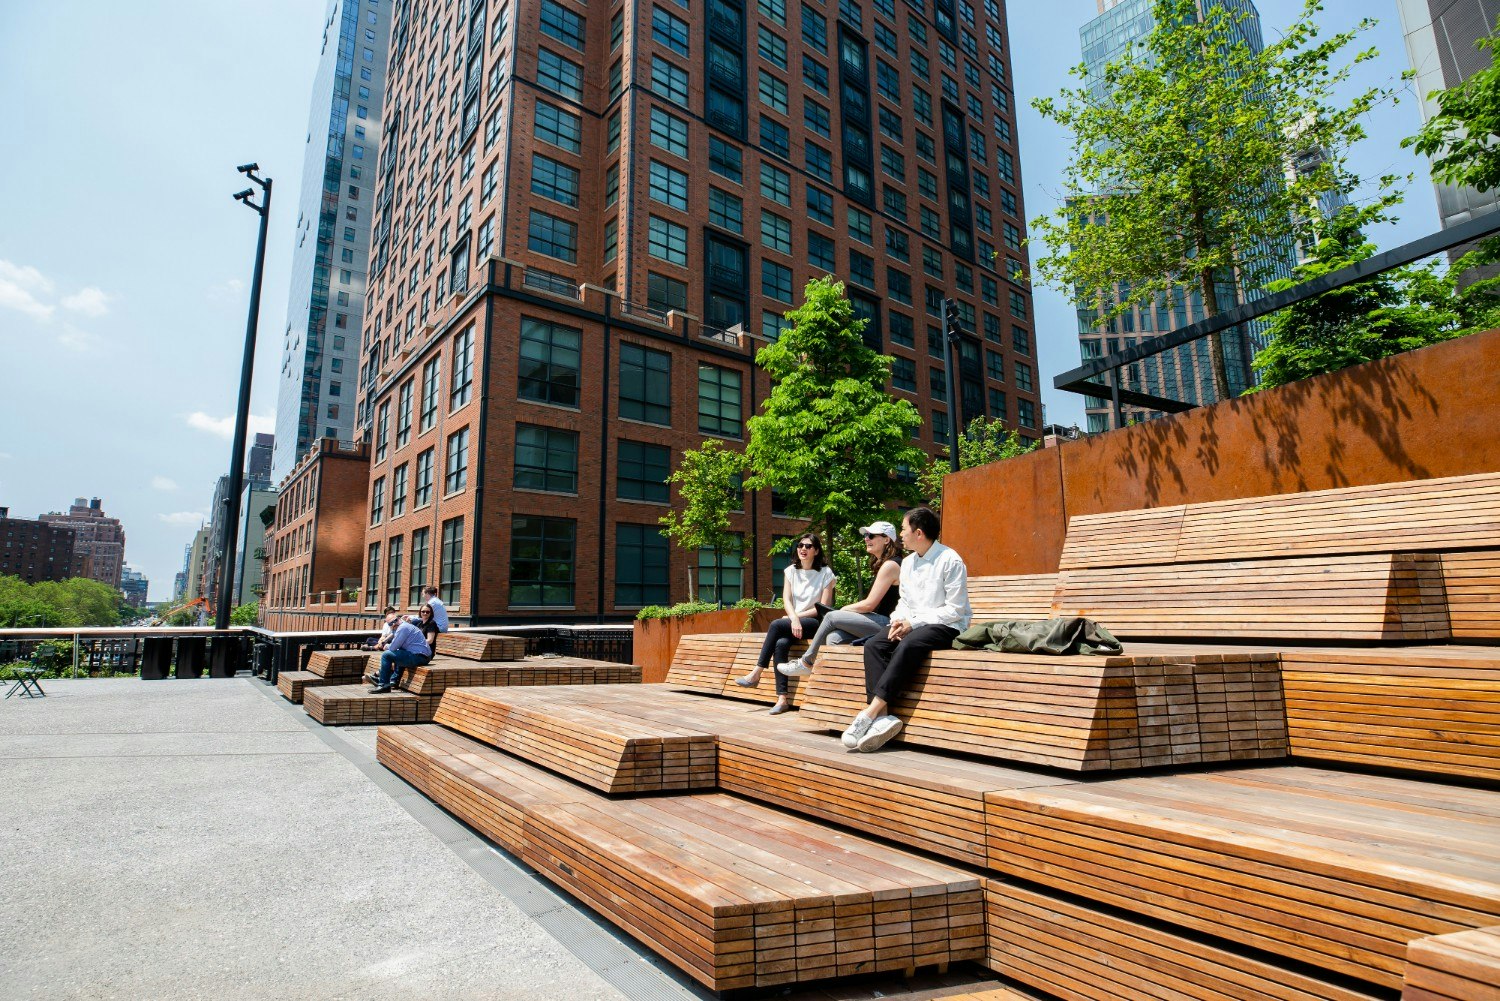 A view of the Spur, the newest section of the High Line in New York.